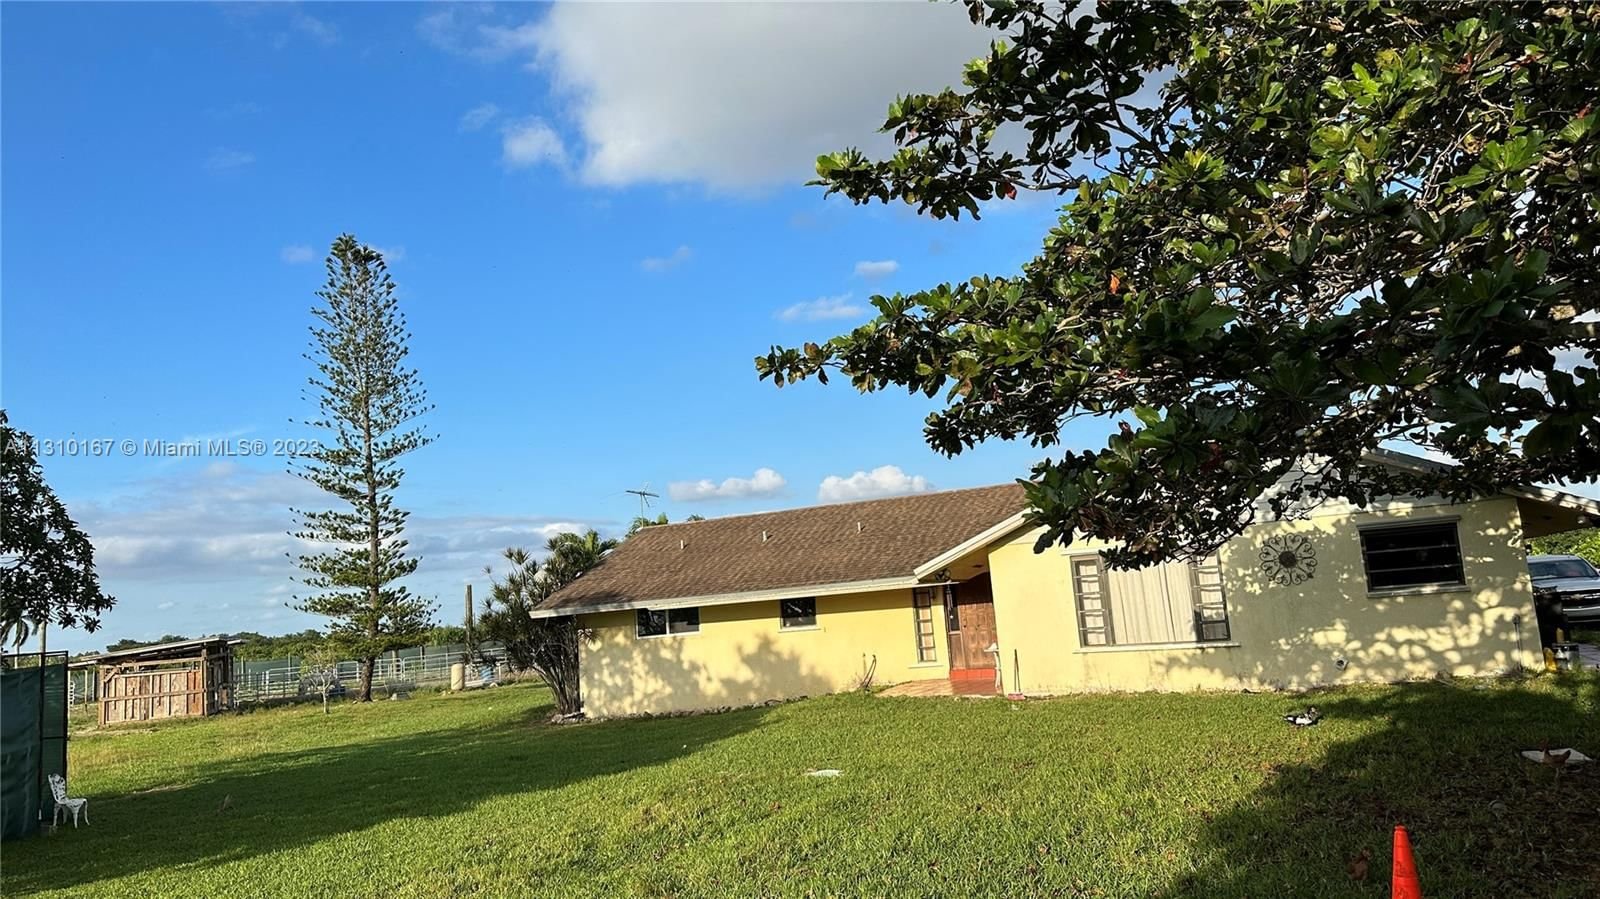 Real estate property located at 30855 205th Ave, Miami-Dade County, Redland, Homestead, FL